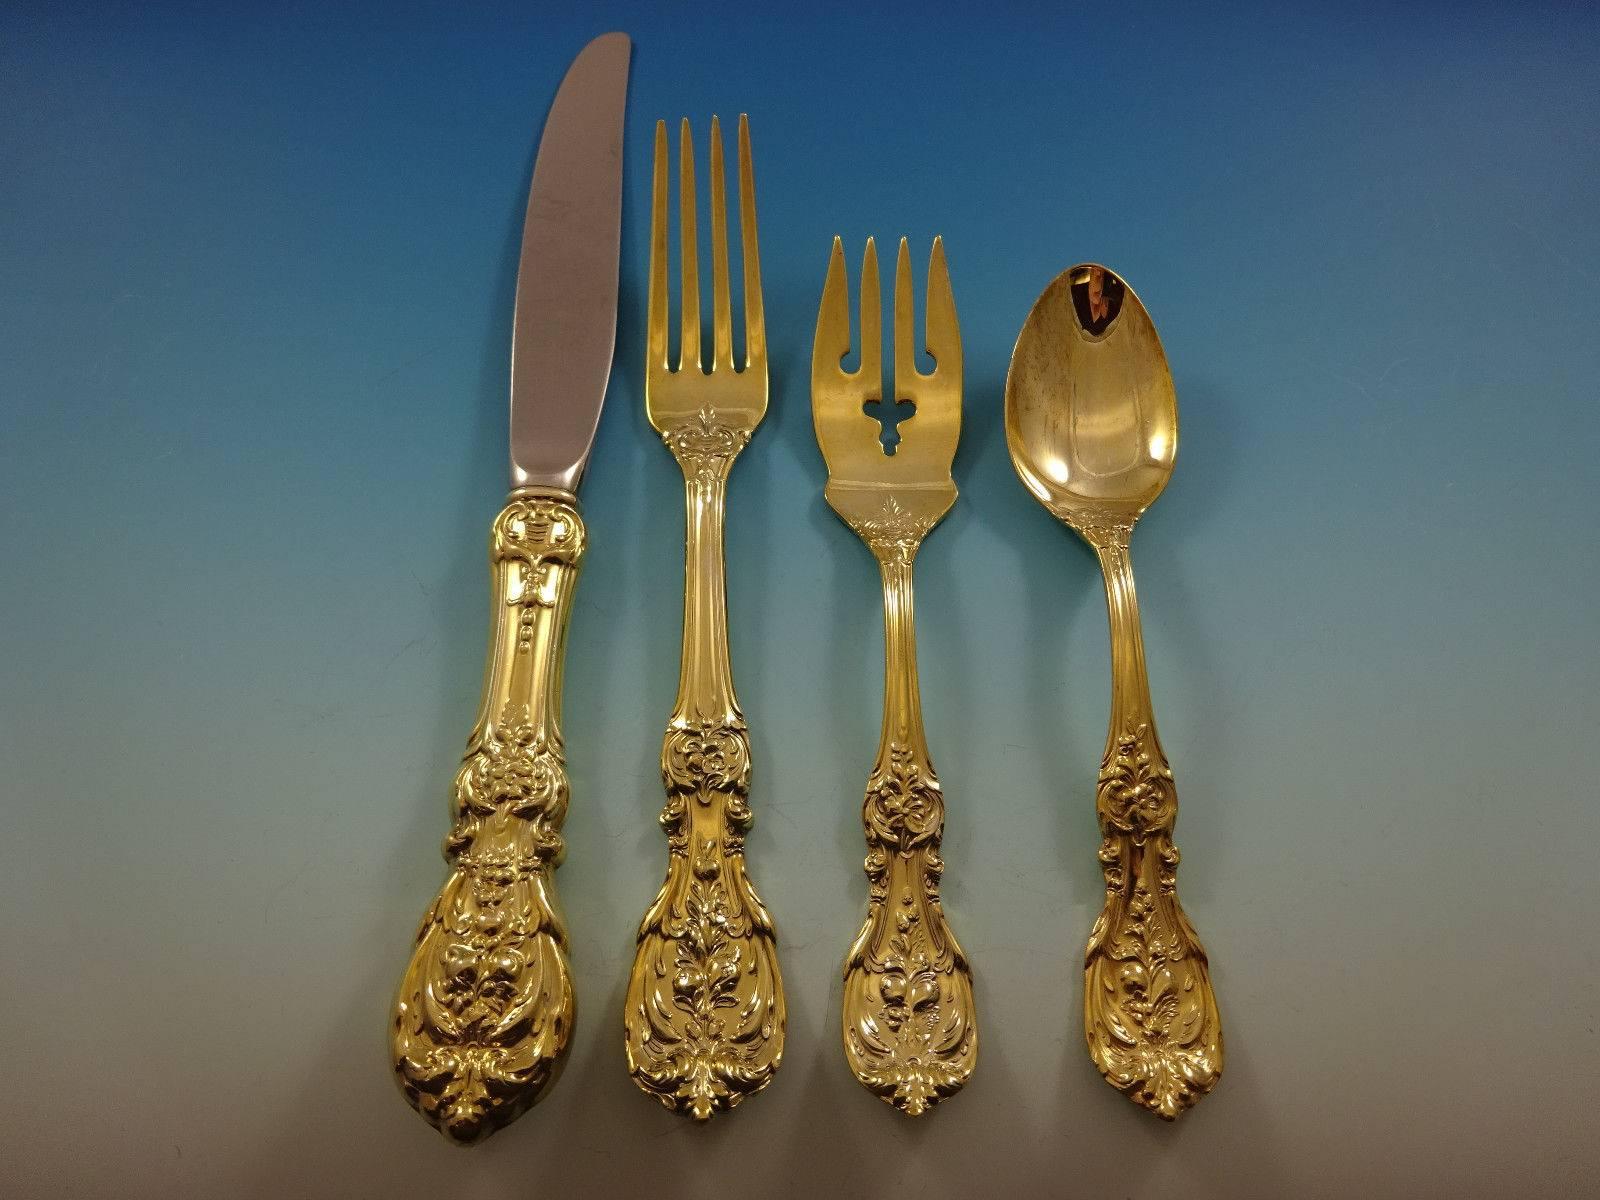 Francis I (newer mark) gold by Reed and Barton. 

Sterling silver flatware set of 48 pieces. Gold flatware is on trend and makes a bold statement on your table, especially when paired with gold rimmed china and gold accents. This set is vermeil